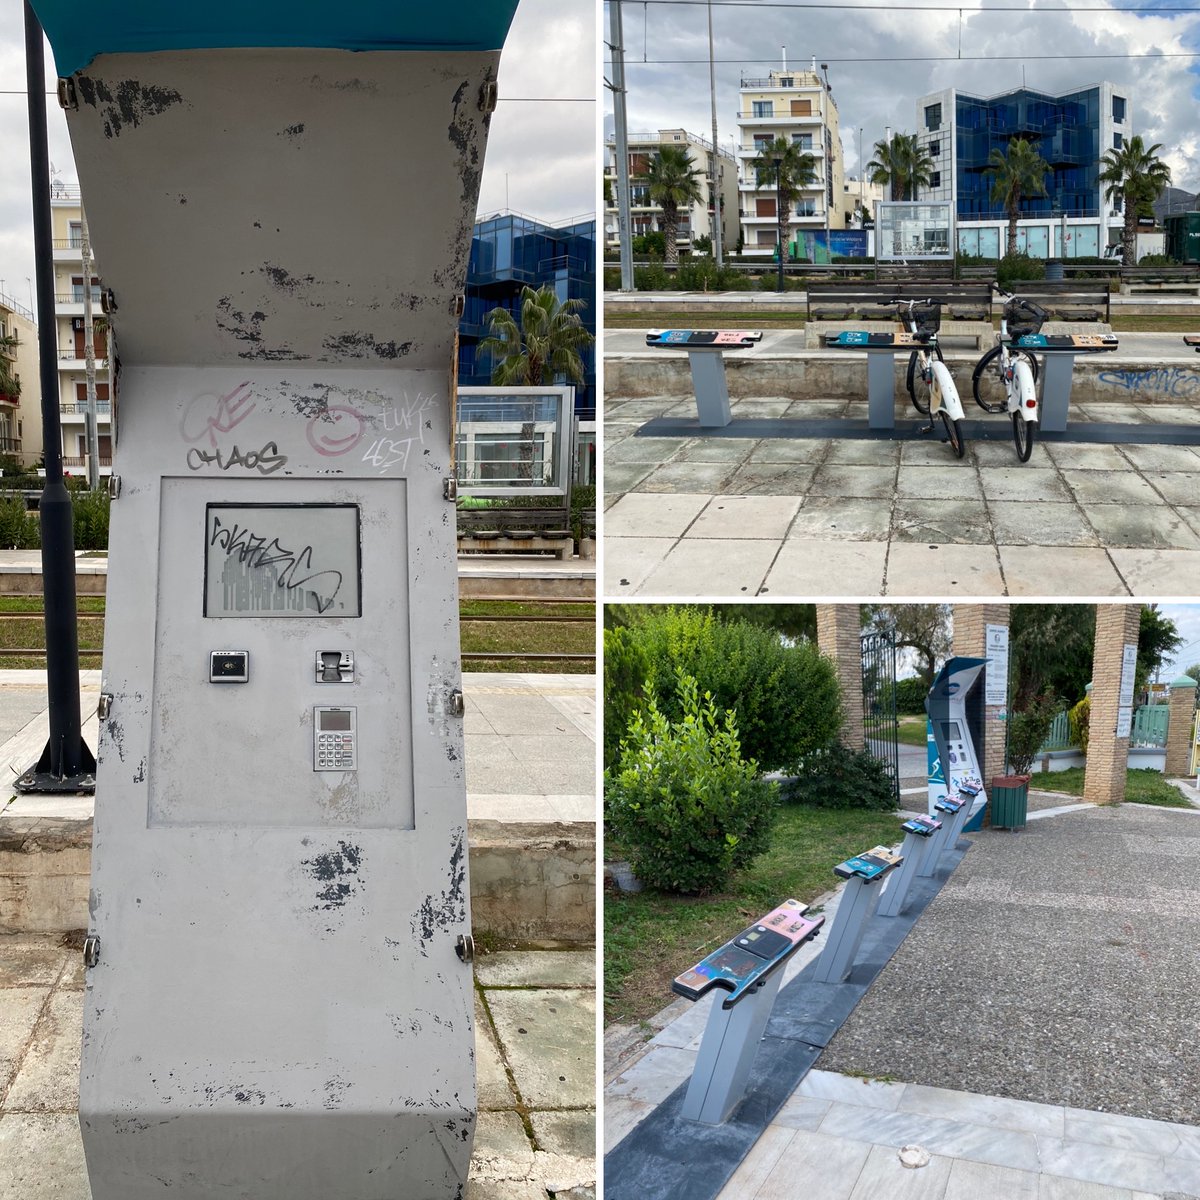 Speaking of bikes, here is the bike-sharing system for the municipality of Alimos: two stations and 20 docks, now in disrepair. The “gimmick” approach to urban planning—the token gesture to create a photo-op rather than a serious attempt to provide mobility services.